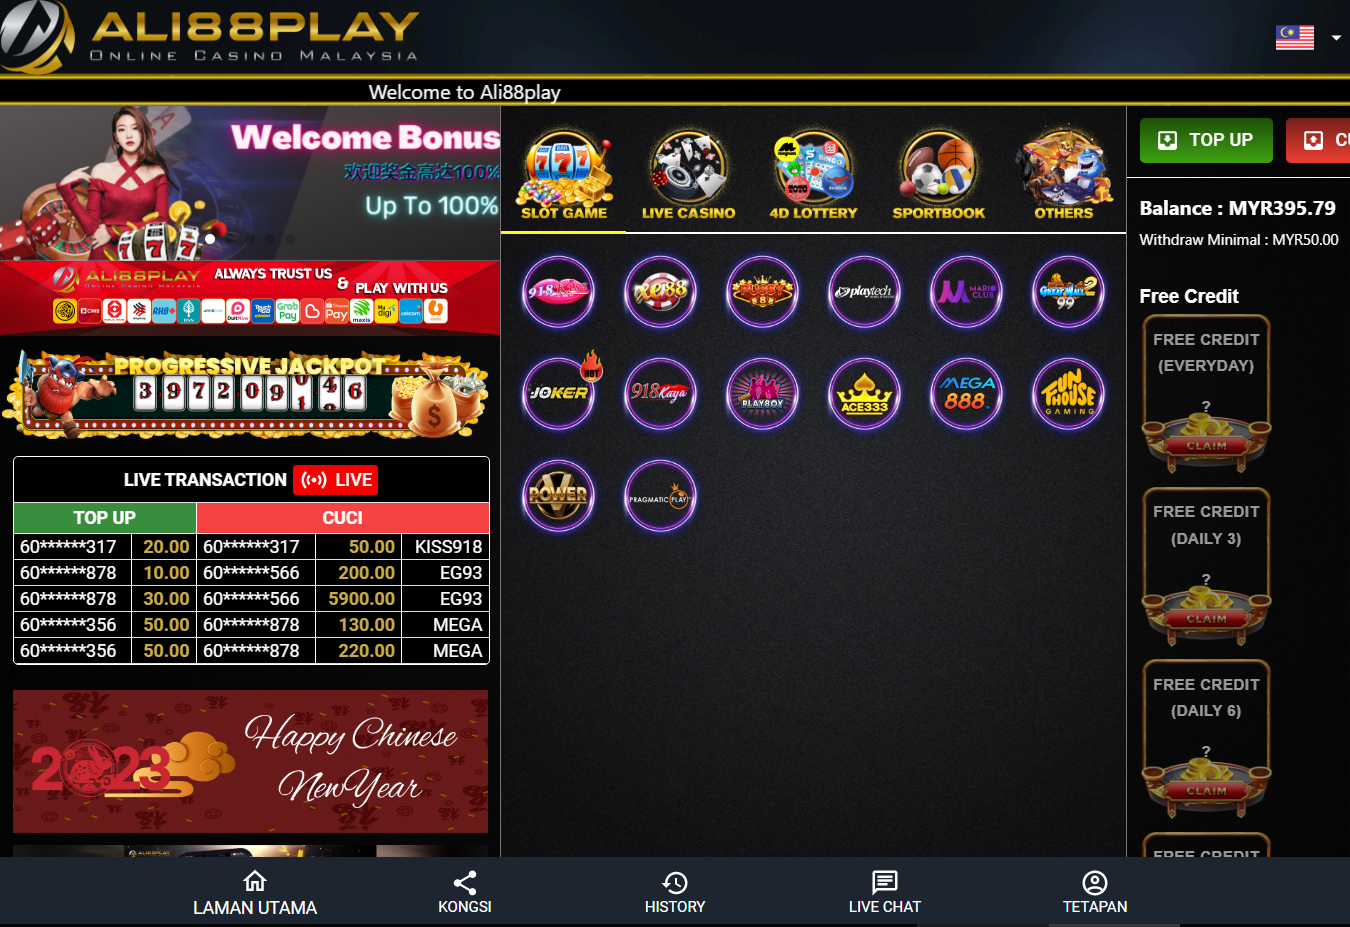 Online Casino: Get Free Bonuses And Win Real Money